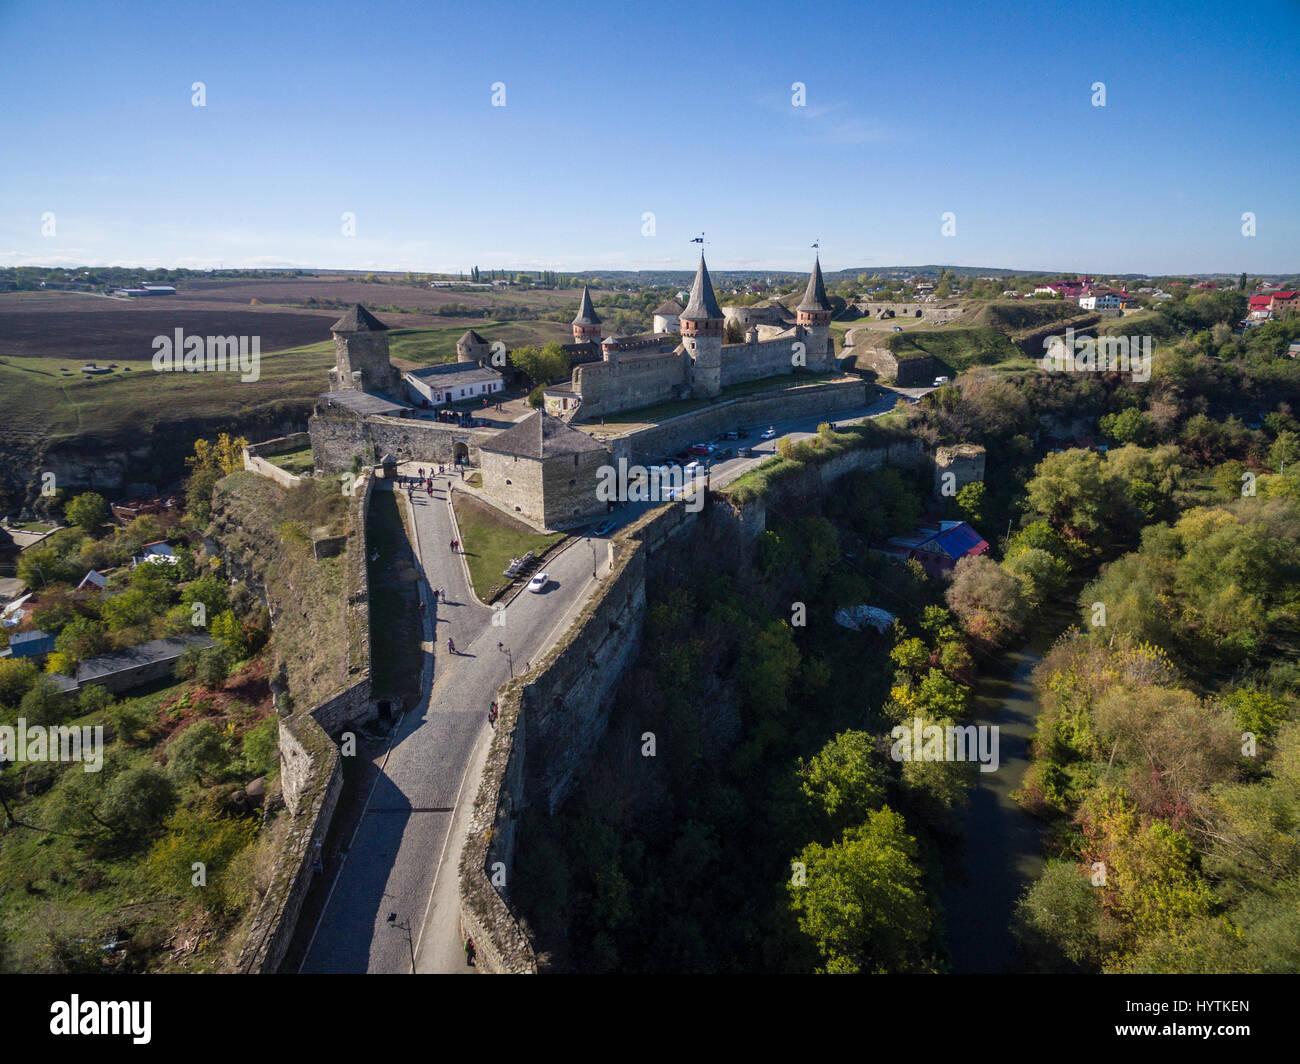 Aerial shot of Kamianets-Podilski castle in Western Ukraine. Taken on a bright clear autumn day with blue skies Stock Photo